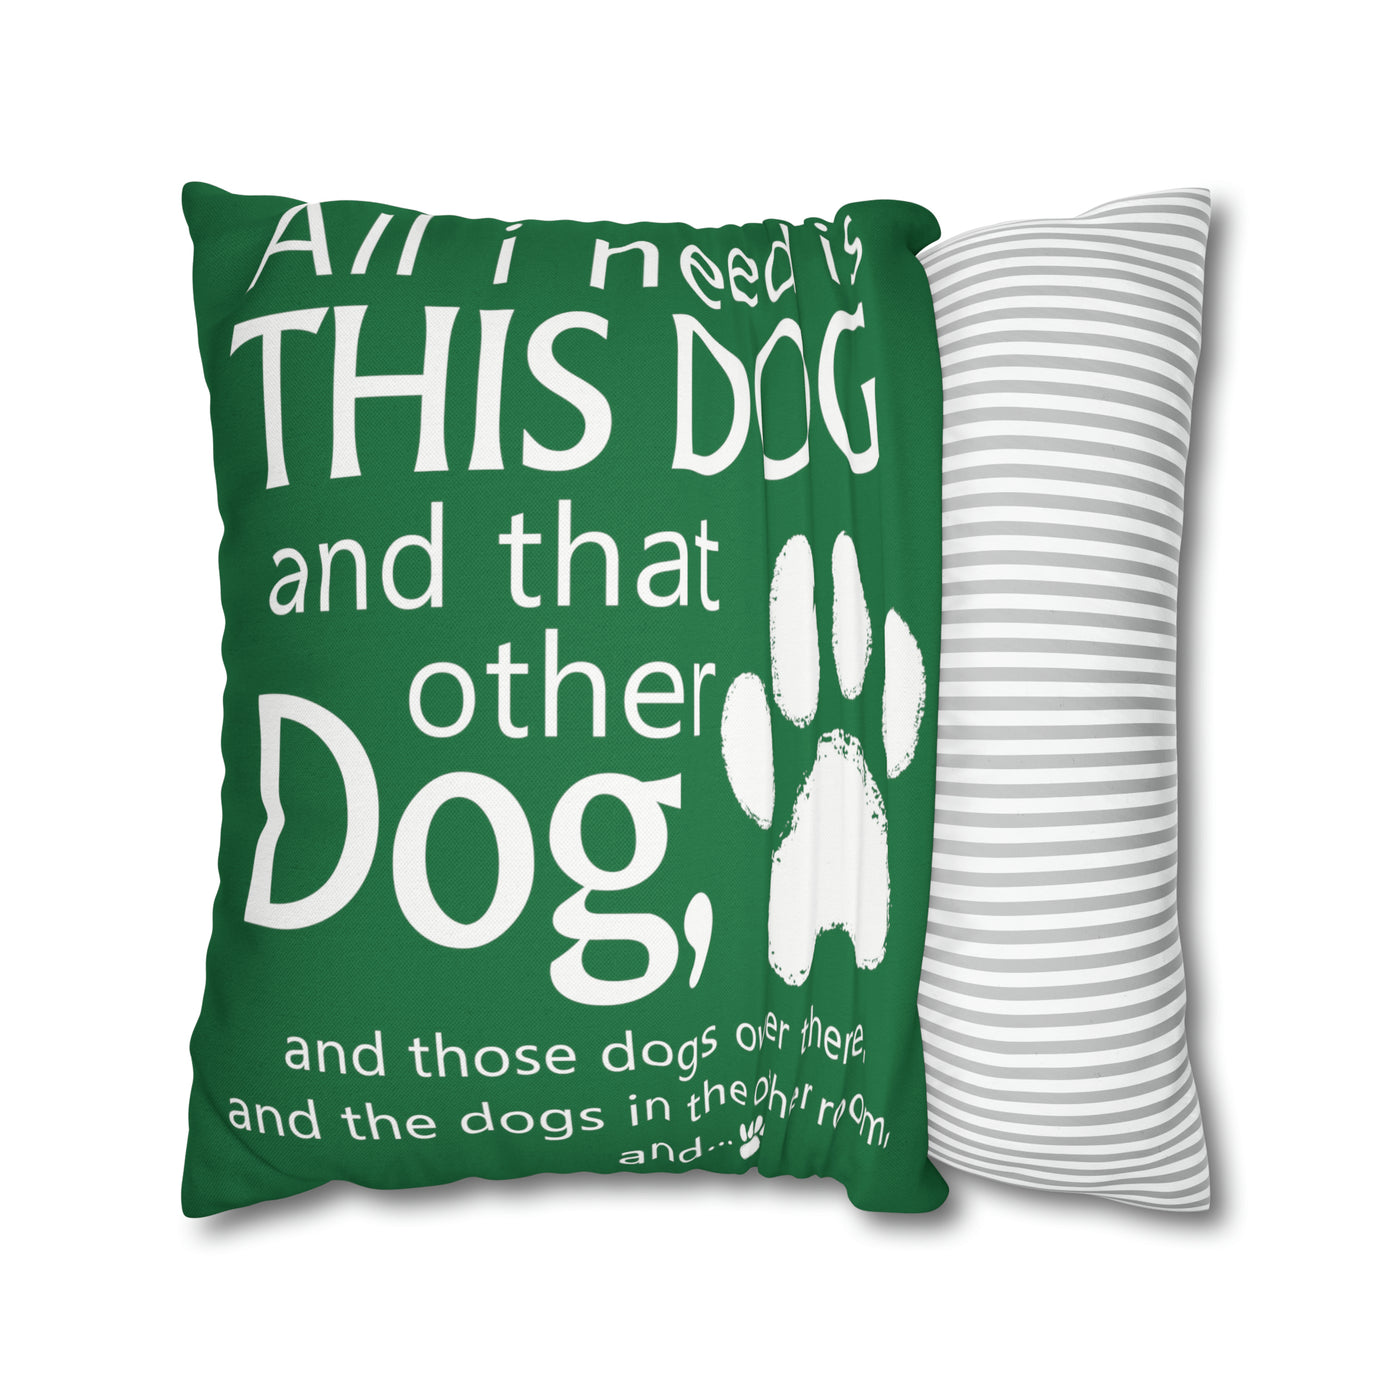 All I need is....This Dog And That Other Dog Polyester Square Pillow Cover